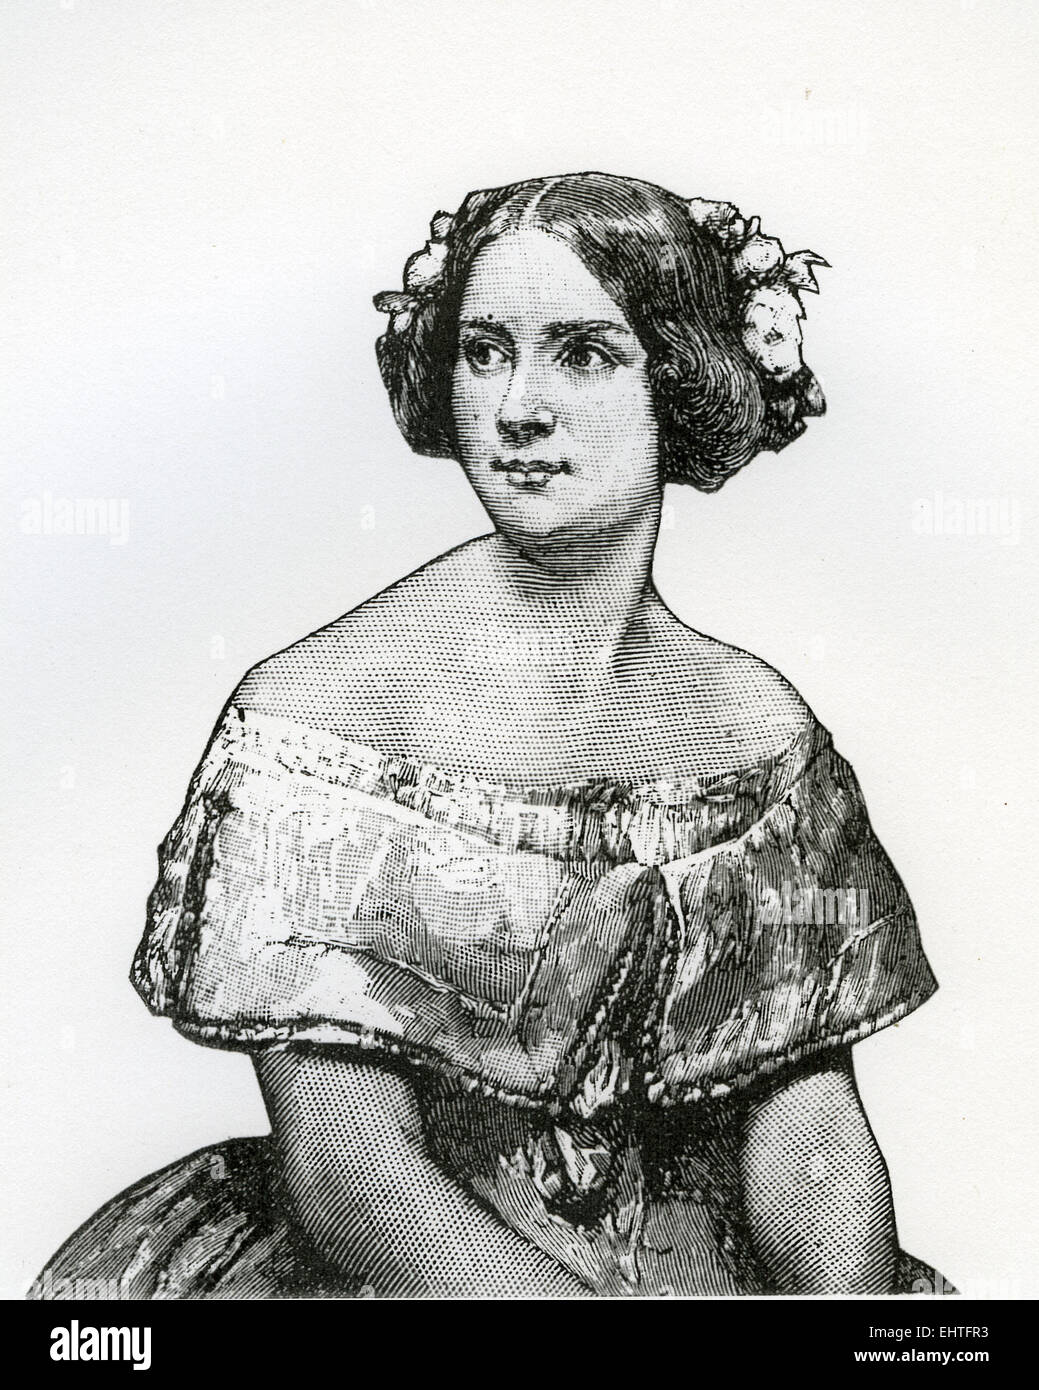 JENNY LIND (1820-1887) Swedish opera singer in an engraving based on an 1862 painting Stock Photo